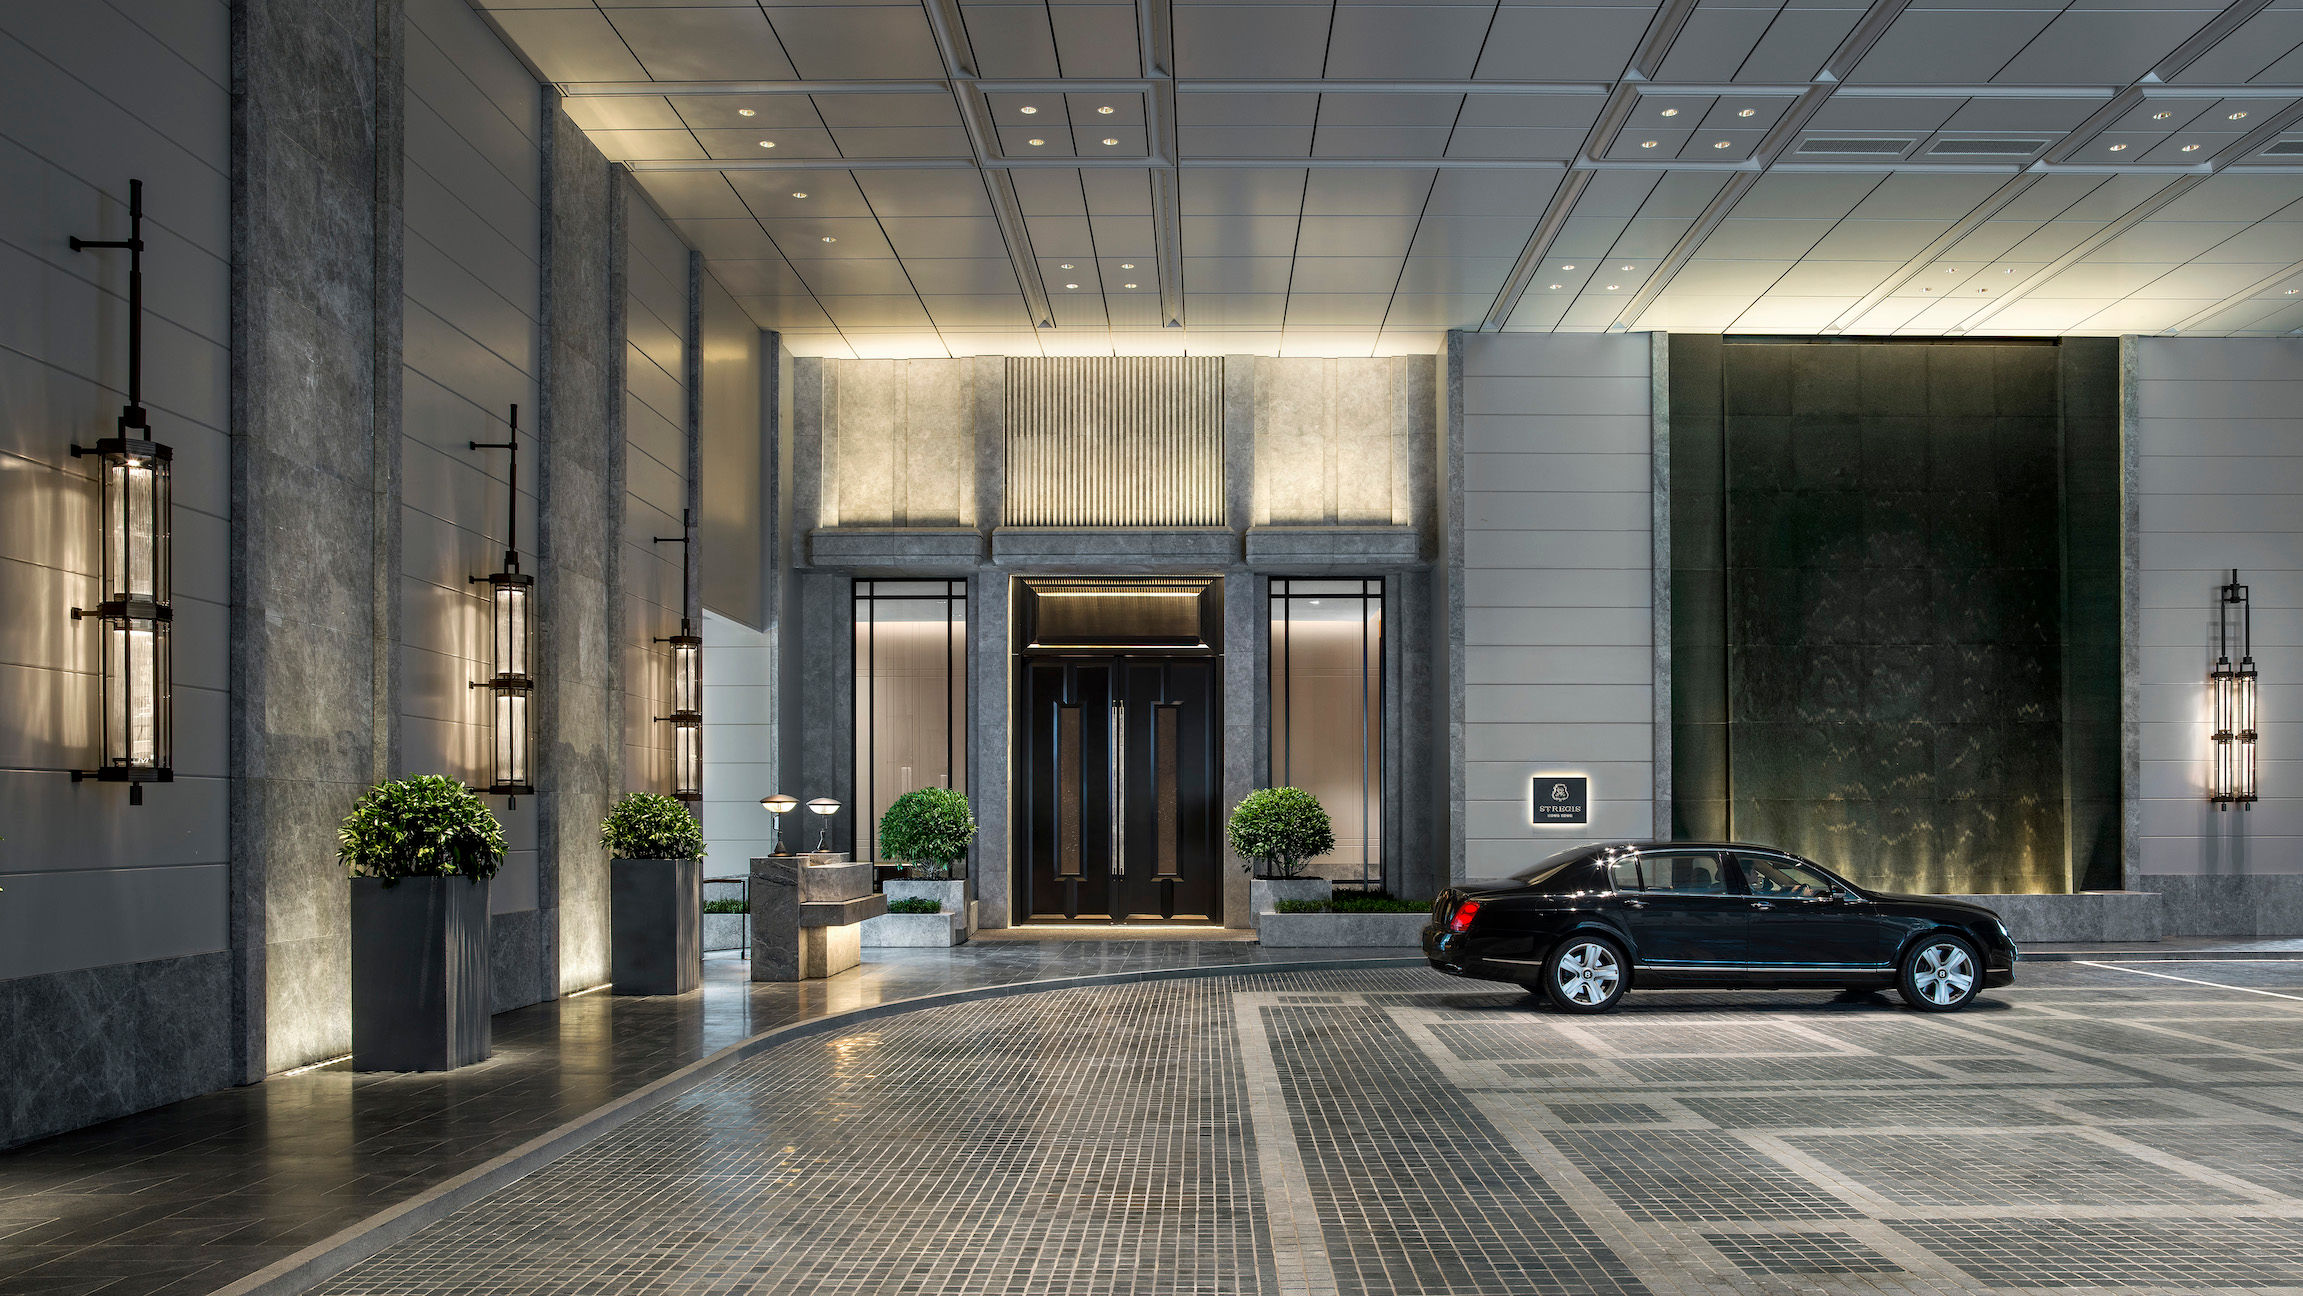 7 Things You Should Know About The St. Regis Hong Kong